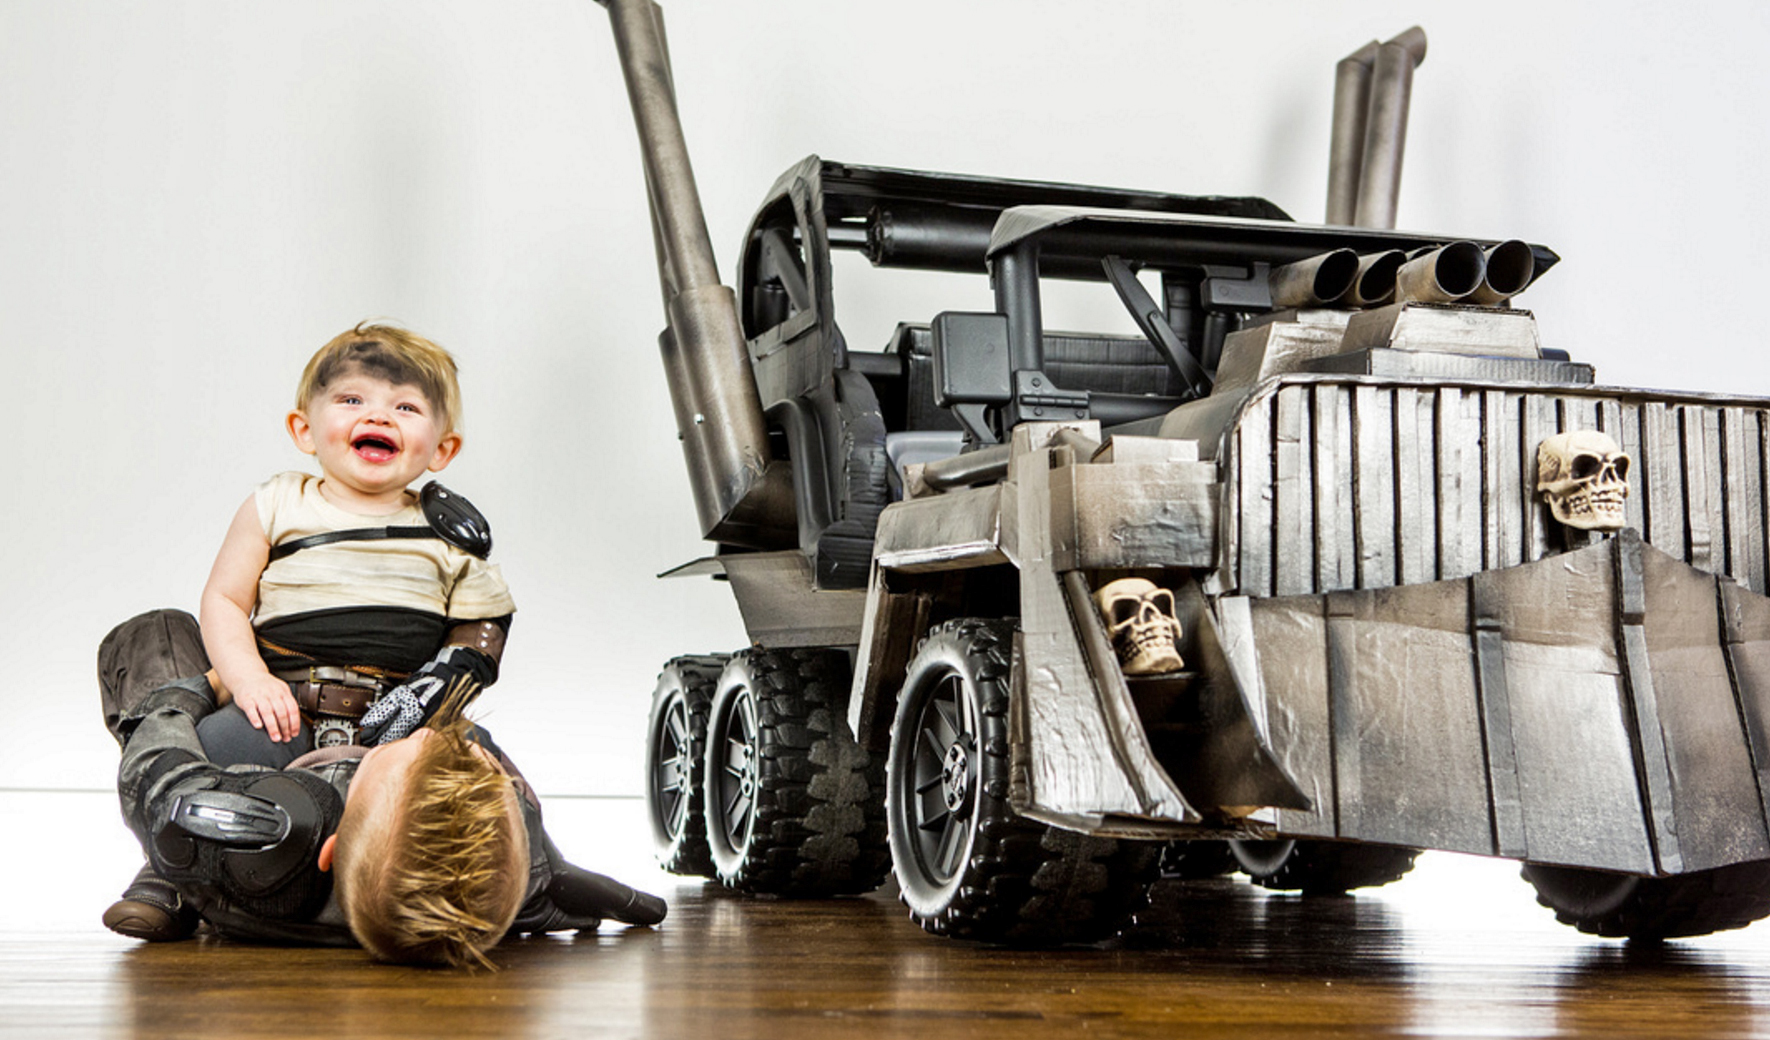 Your Car Will Never Be As Amazing As This Mad Max Power Wheels